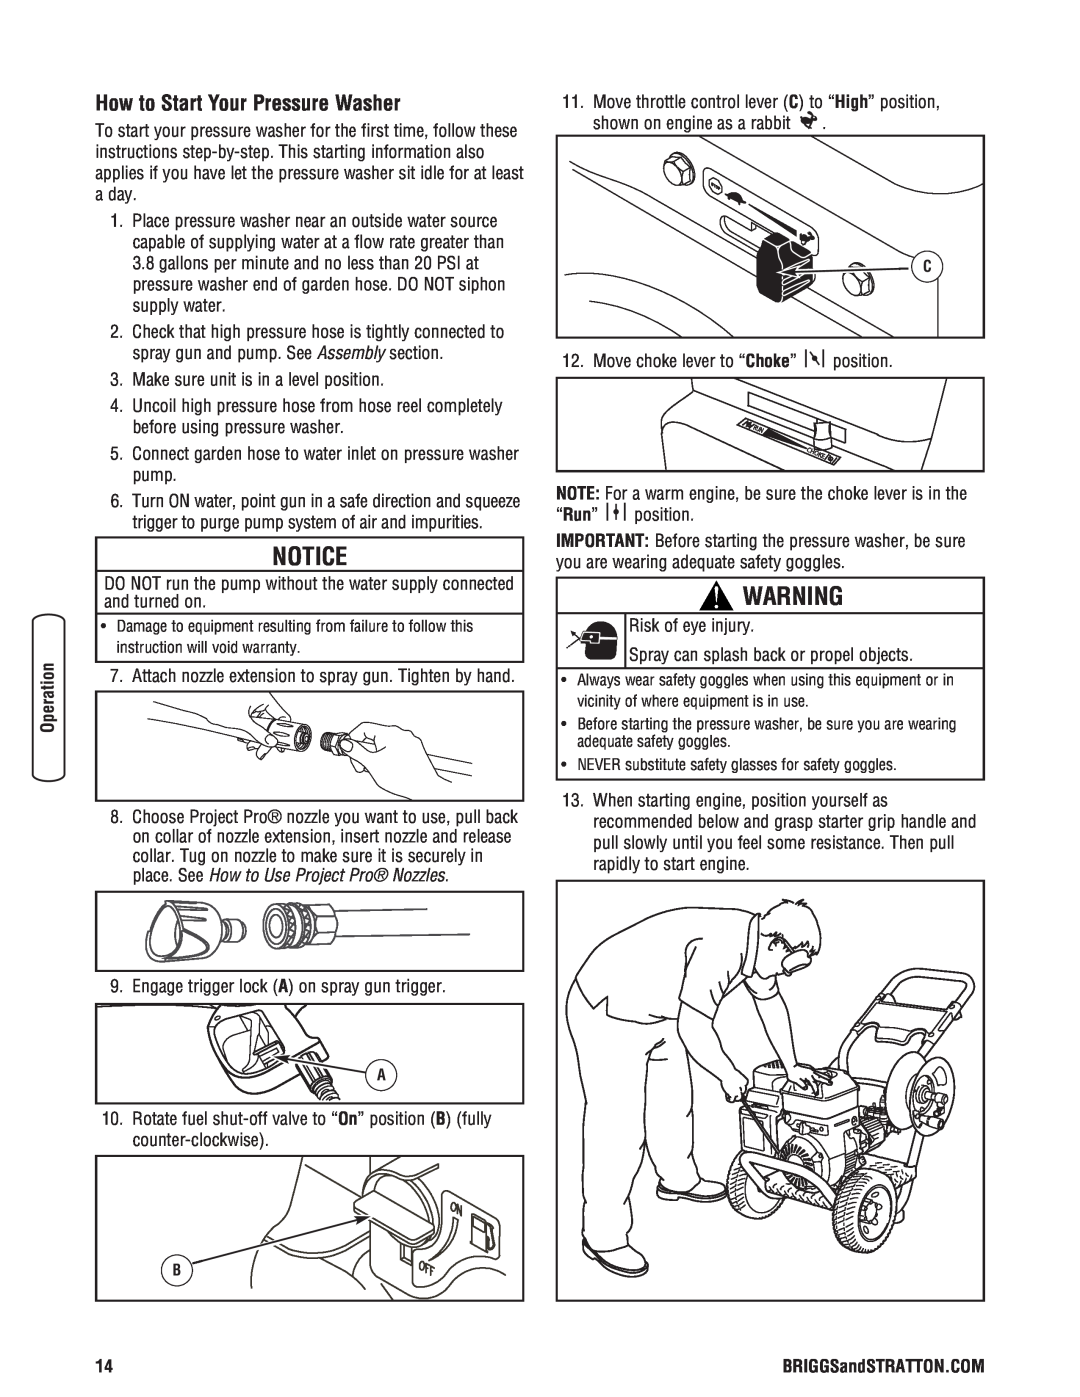 Briggs & Stratton 020364-0 manual Notice, How to Start Your Pressure Washer 